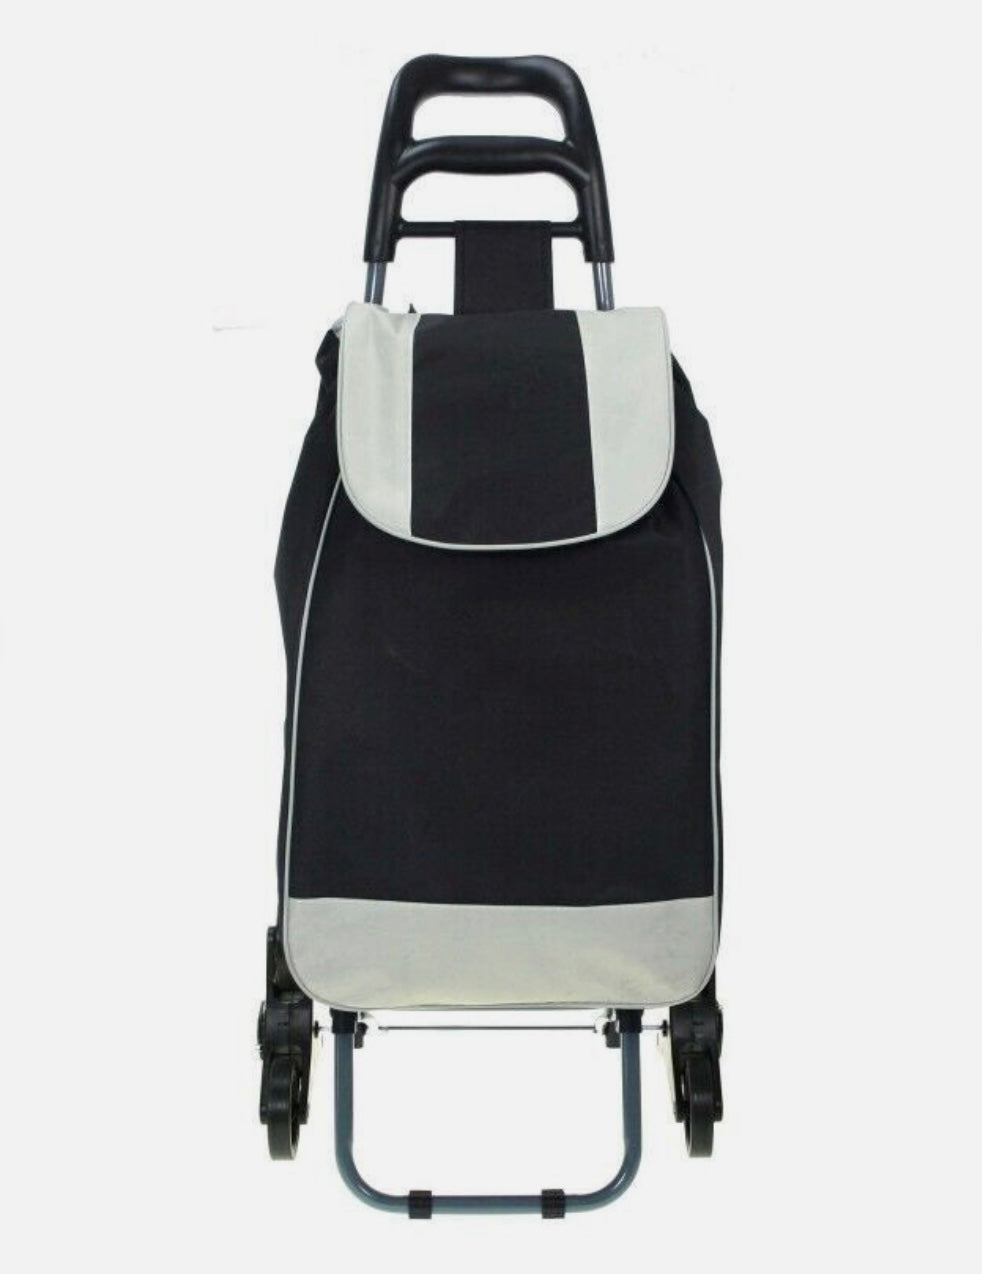 Foldable Grocery Shopping Trolley Bag With Two Wheels | Portable Rolling Shopping Cart Zaappy.com